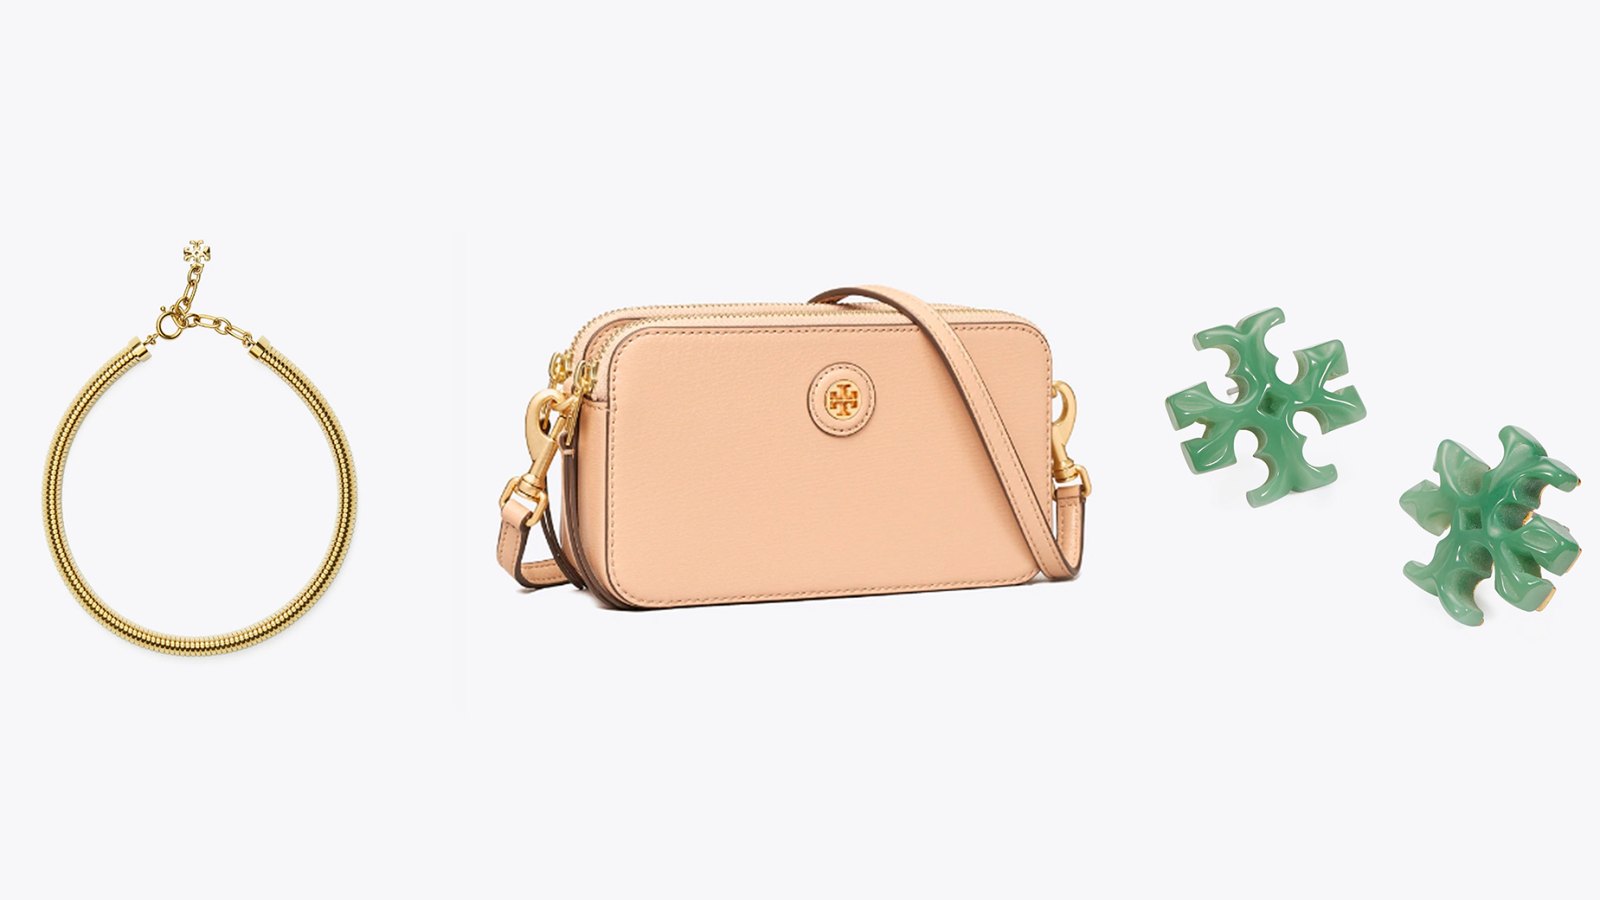 Tory Burch Gift Picks You Can Get on Sale Right Now